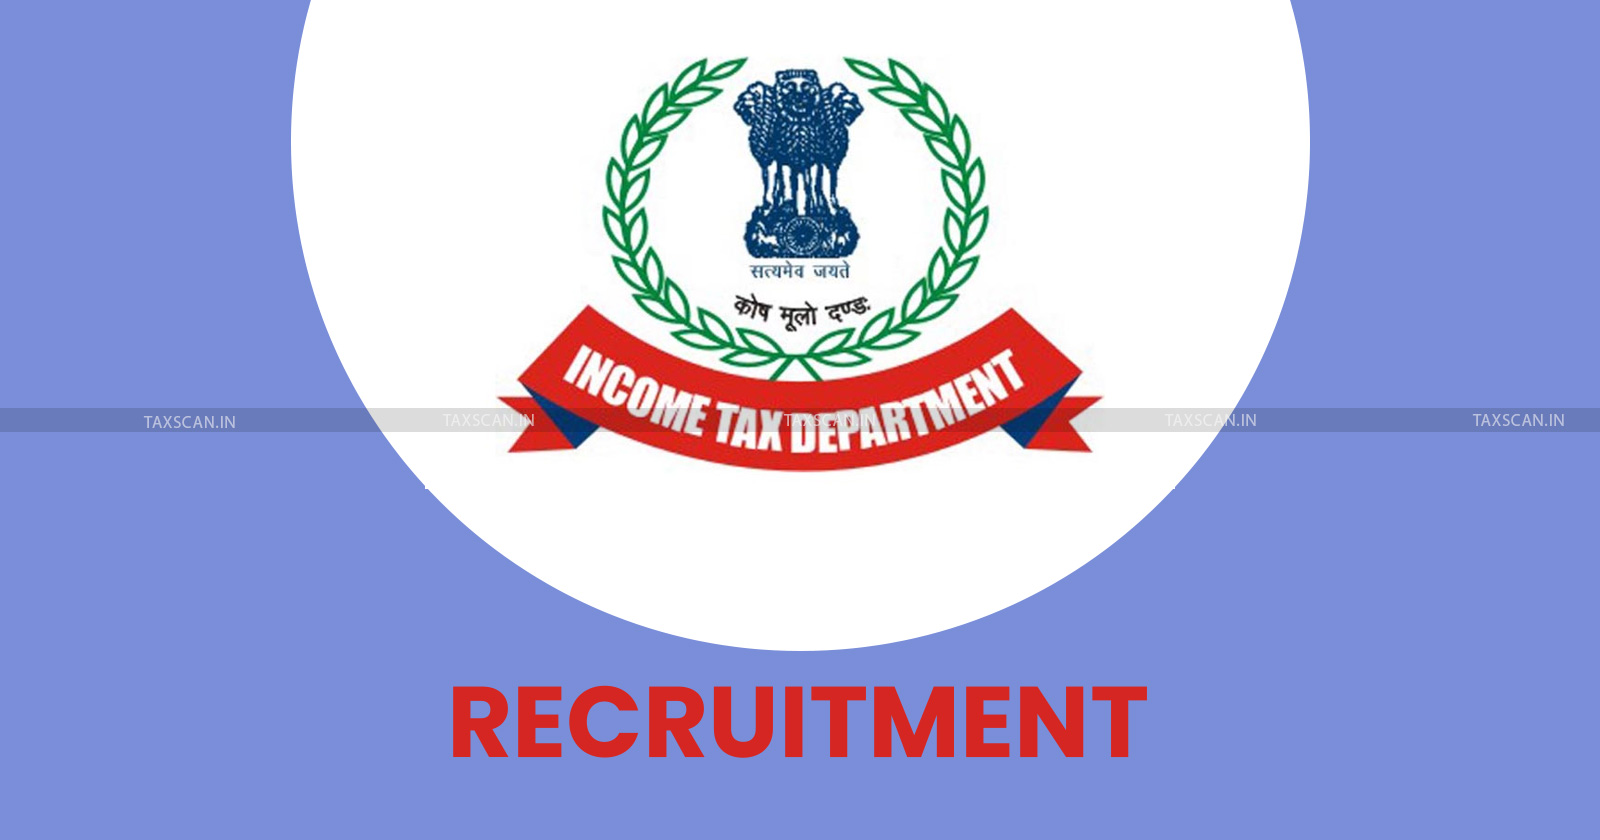 Income Tax Recruitment - Job openings in Income Tax Mumbai - Inspector vacancies in Income Tax - MTS recruitment - Income Tax jobs - Income Tax Mumbai - taxscan